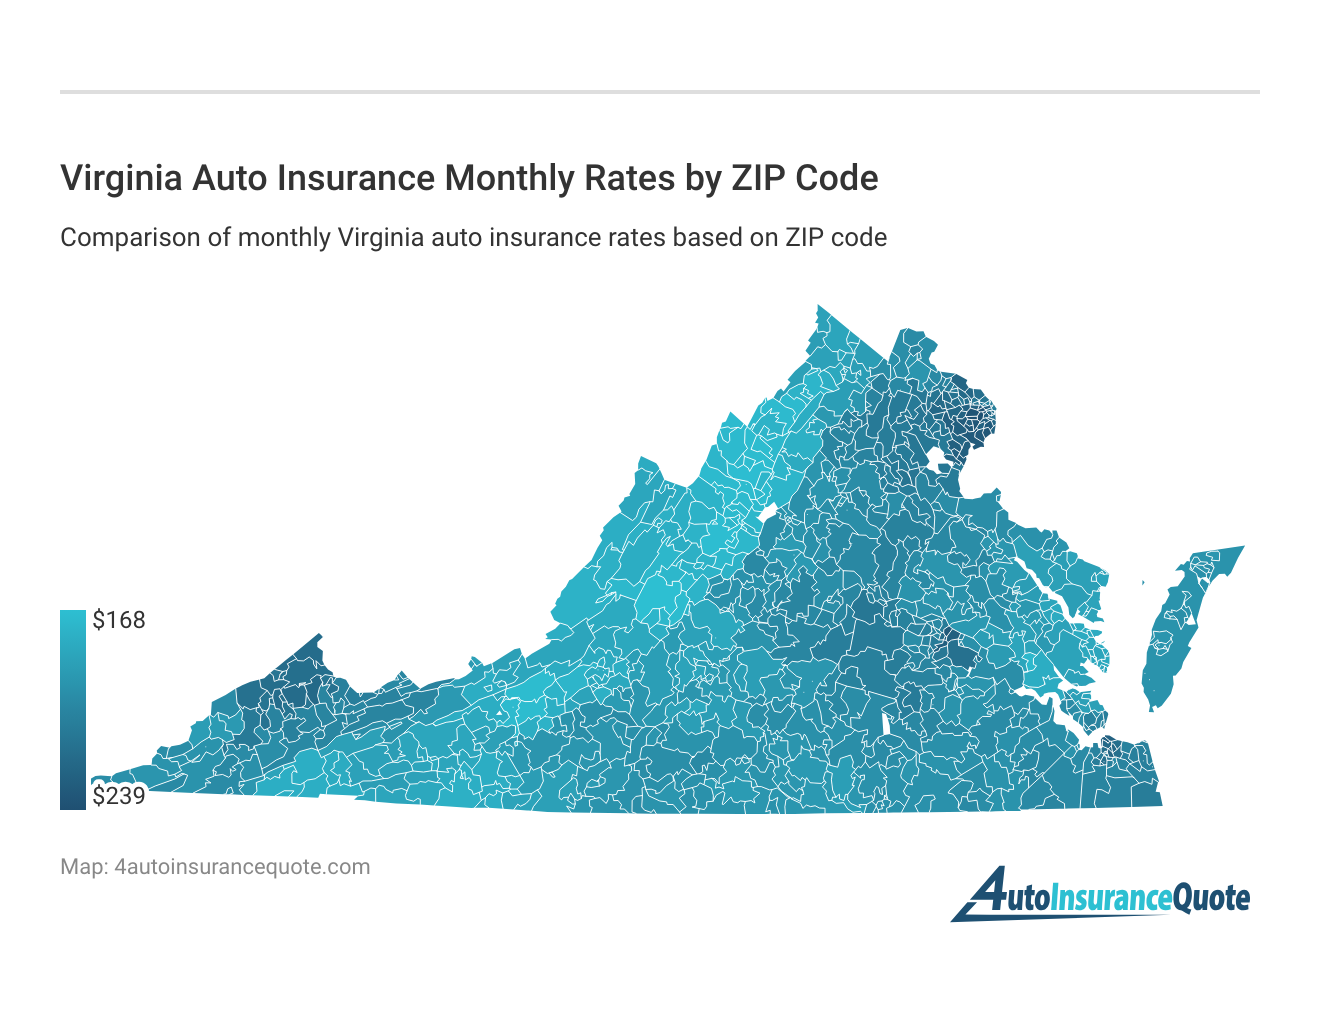 <h3>Virginia Auto Insurance Monthly Rates by ZIP Code</h3>